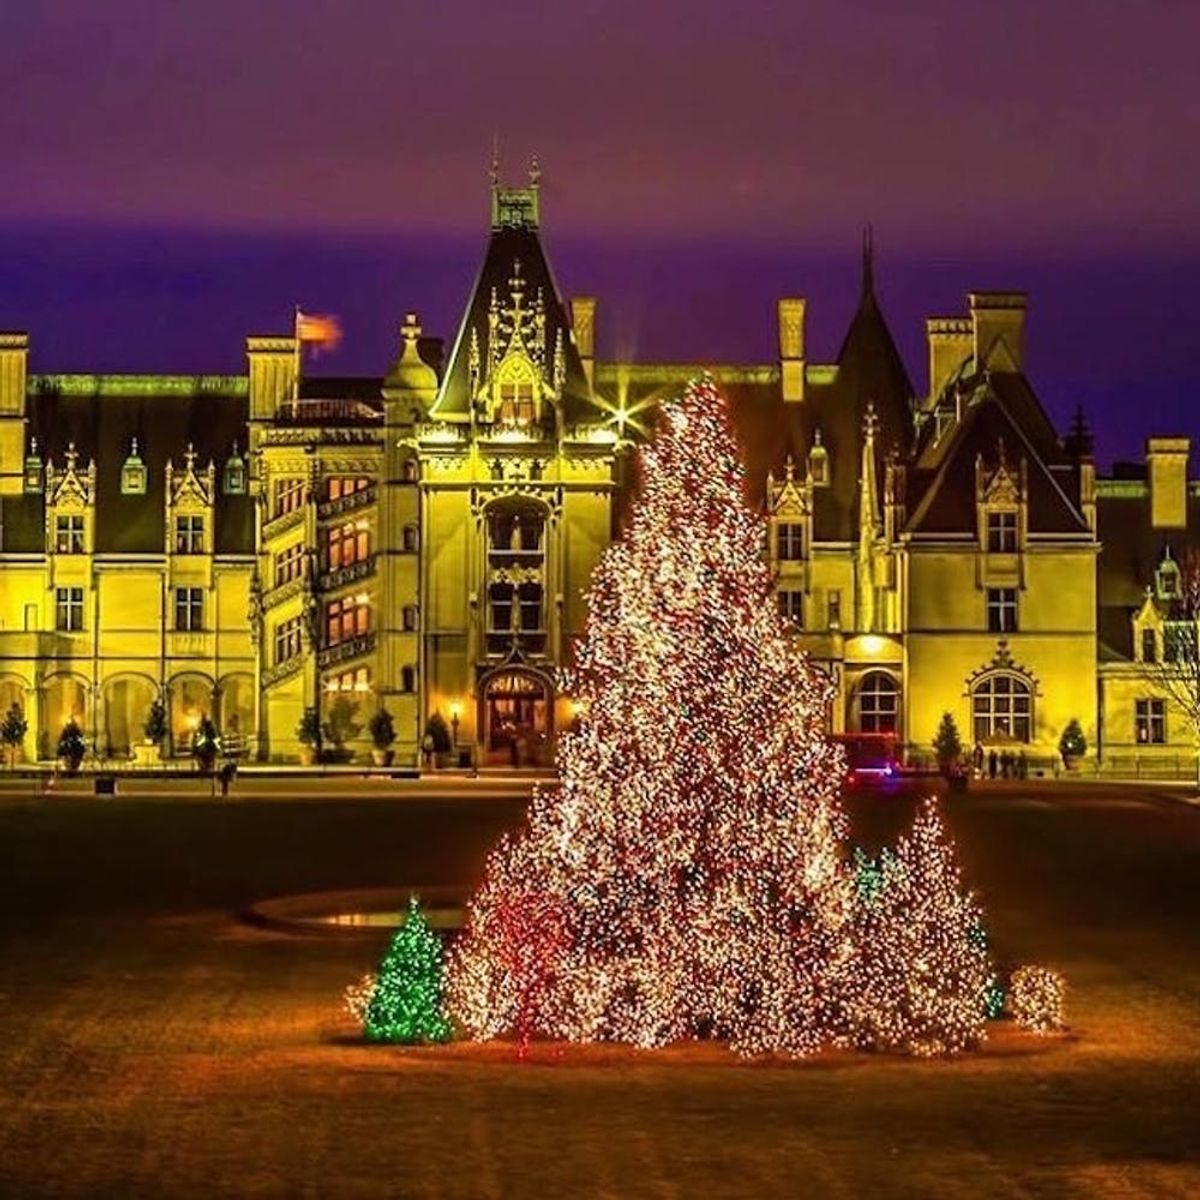 10 US Towns That Take Christmas to Another Level